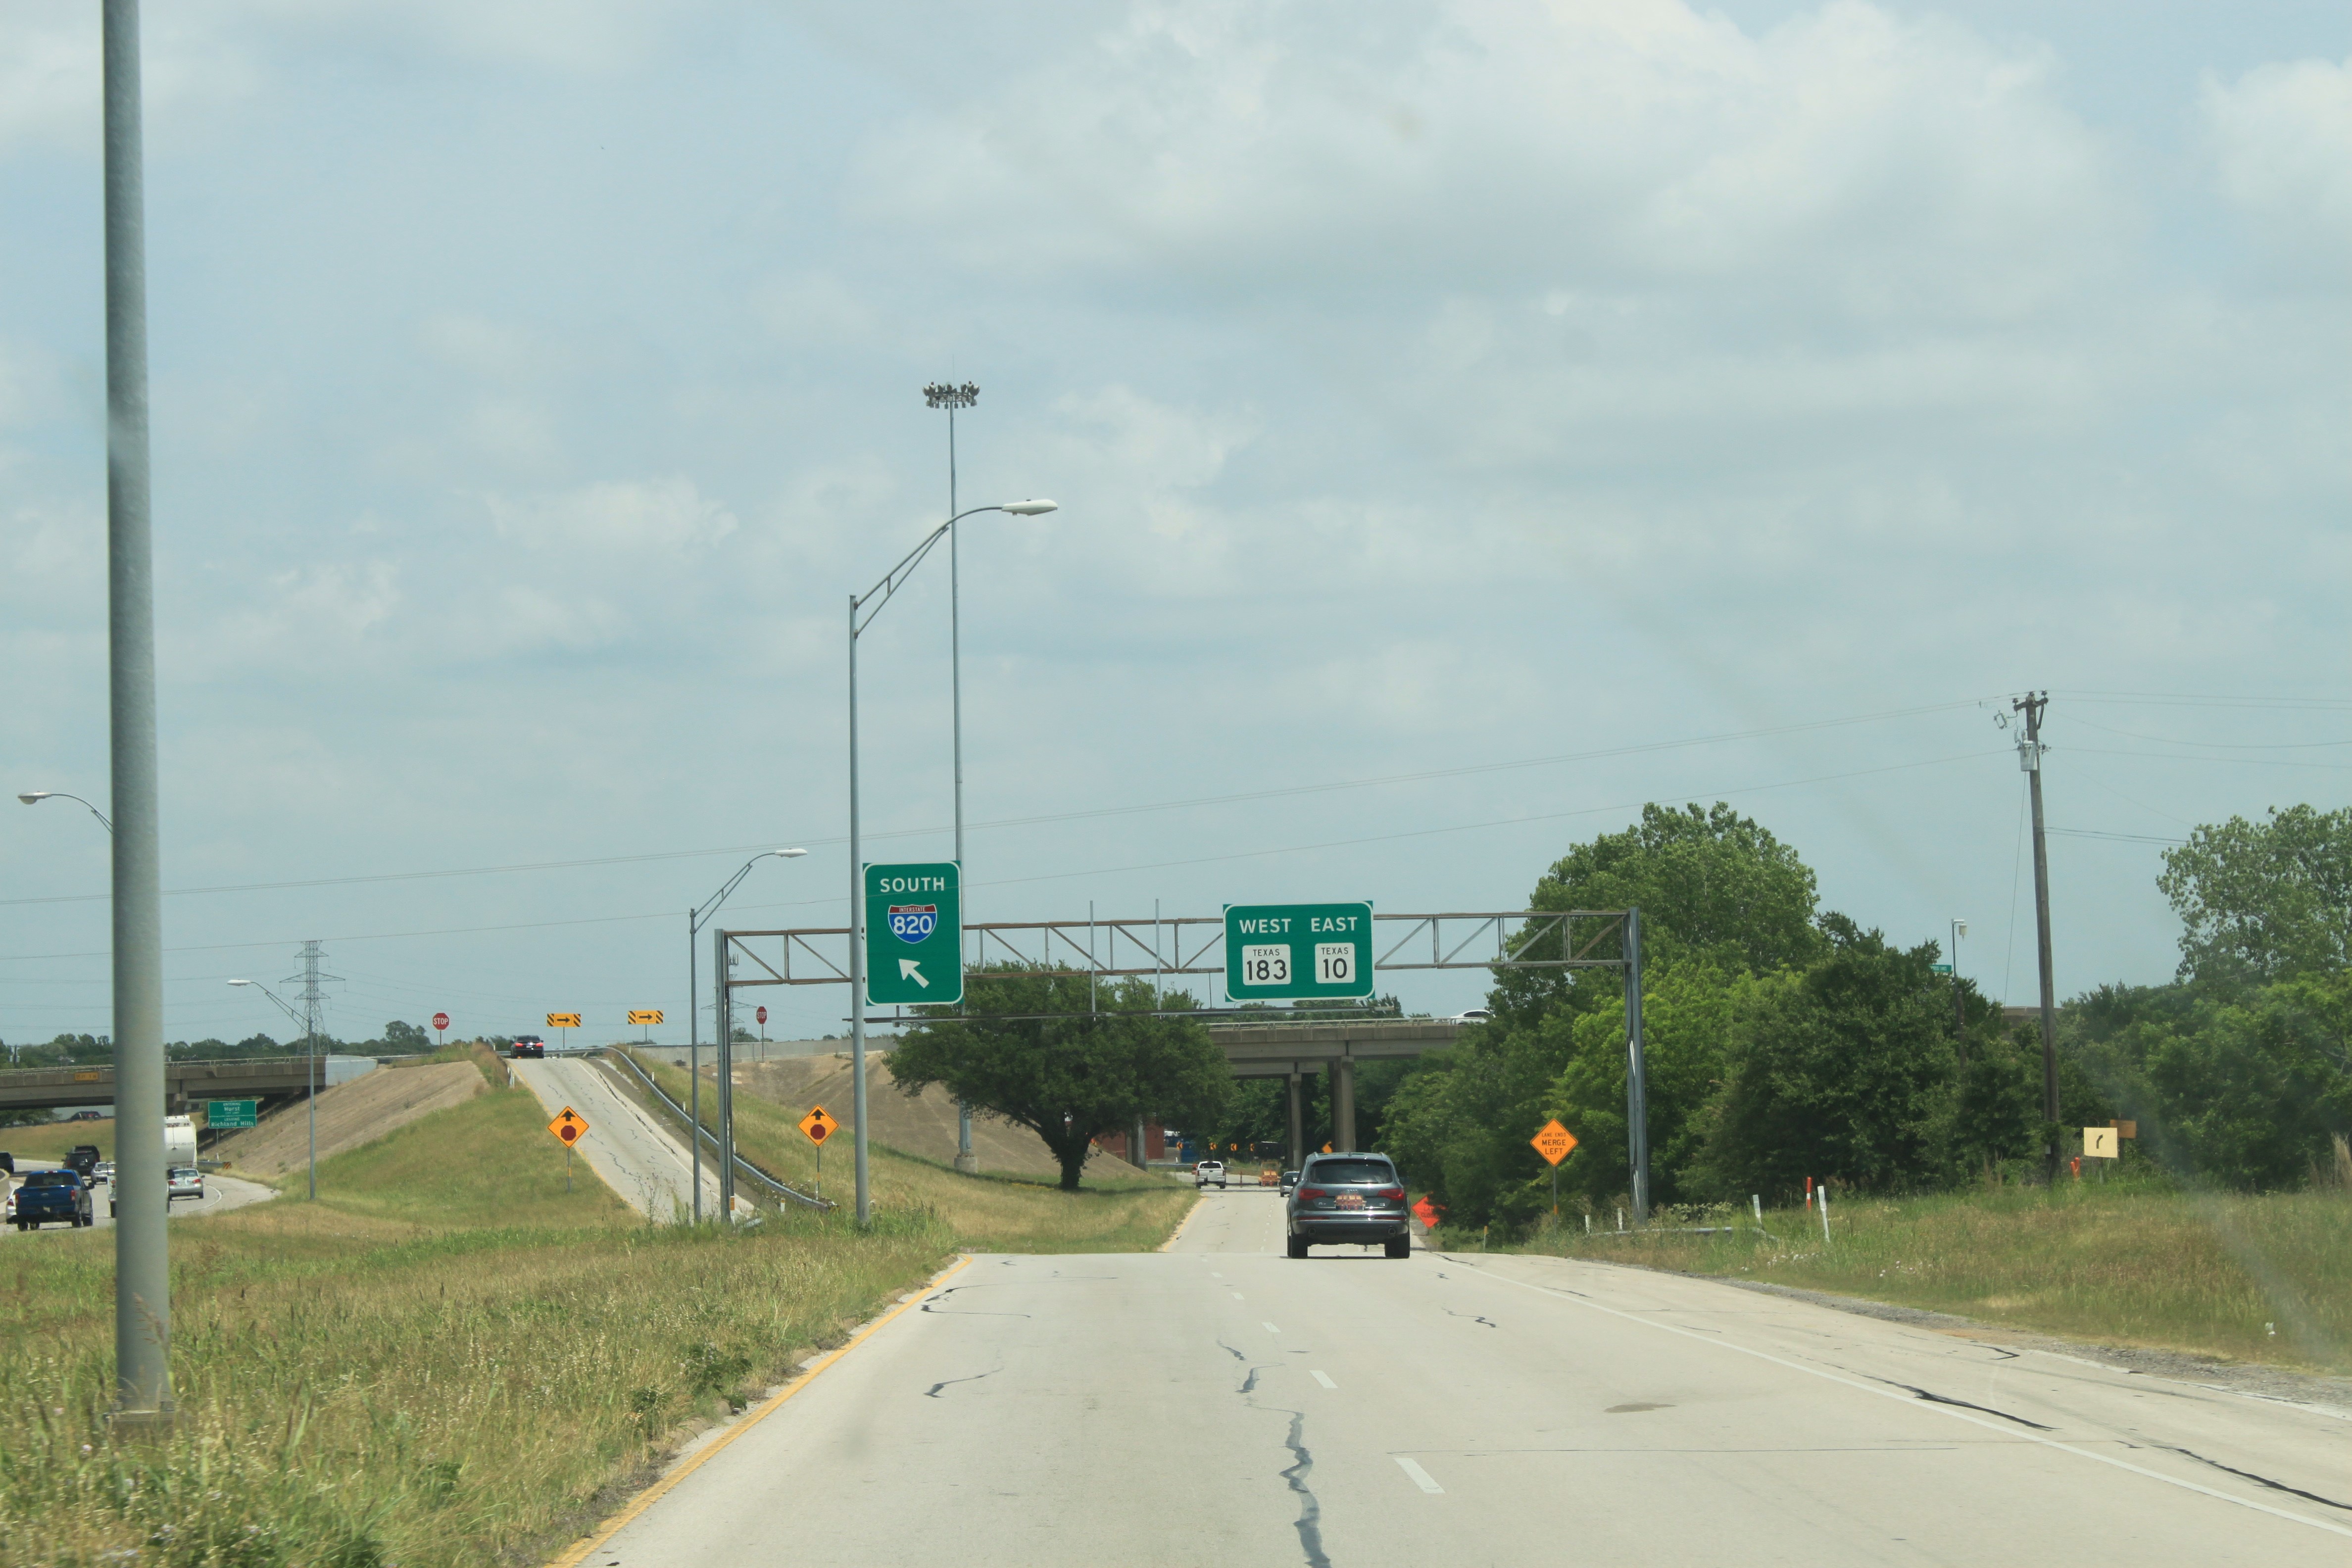 SH 121 northbound frontage road approaching ramp to access I-820 southbound or continue to Hurst Blvd